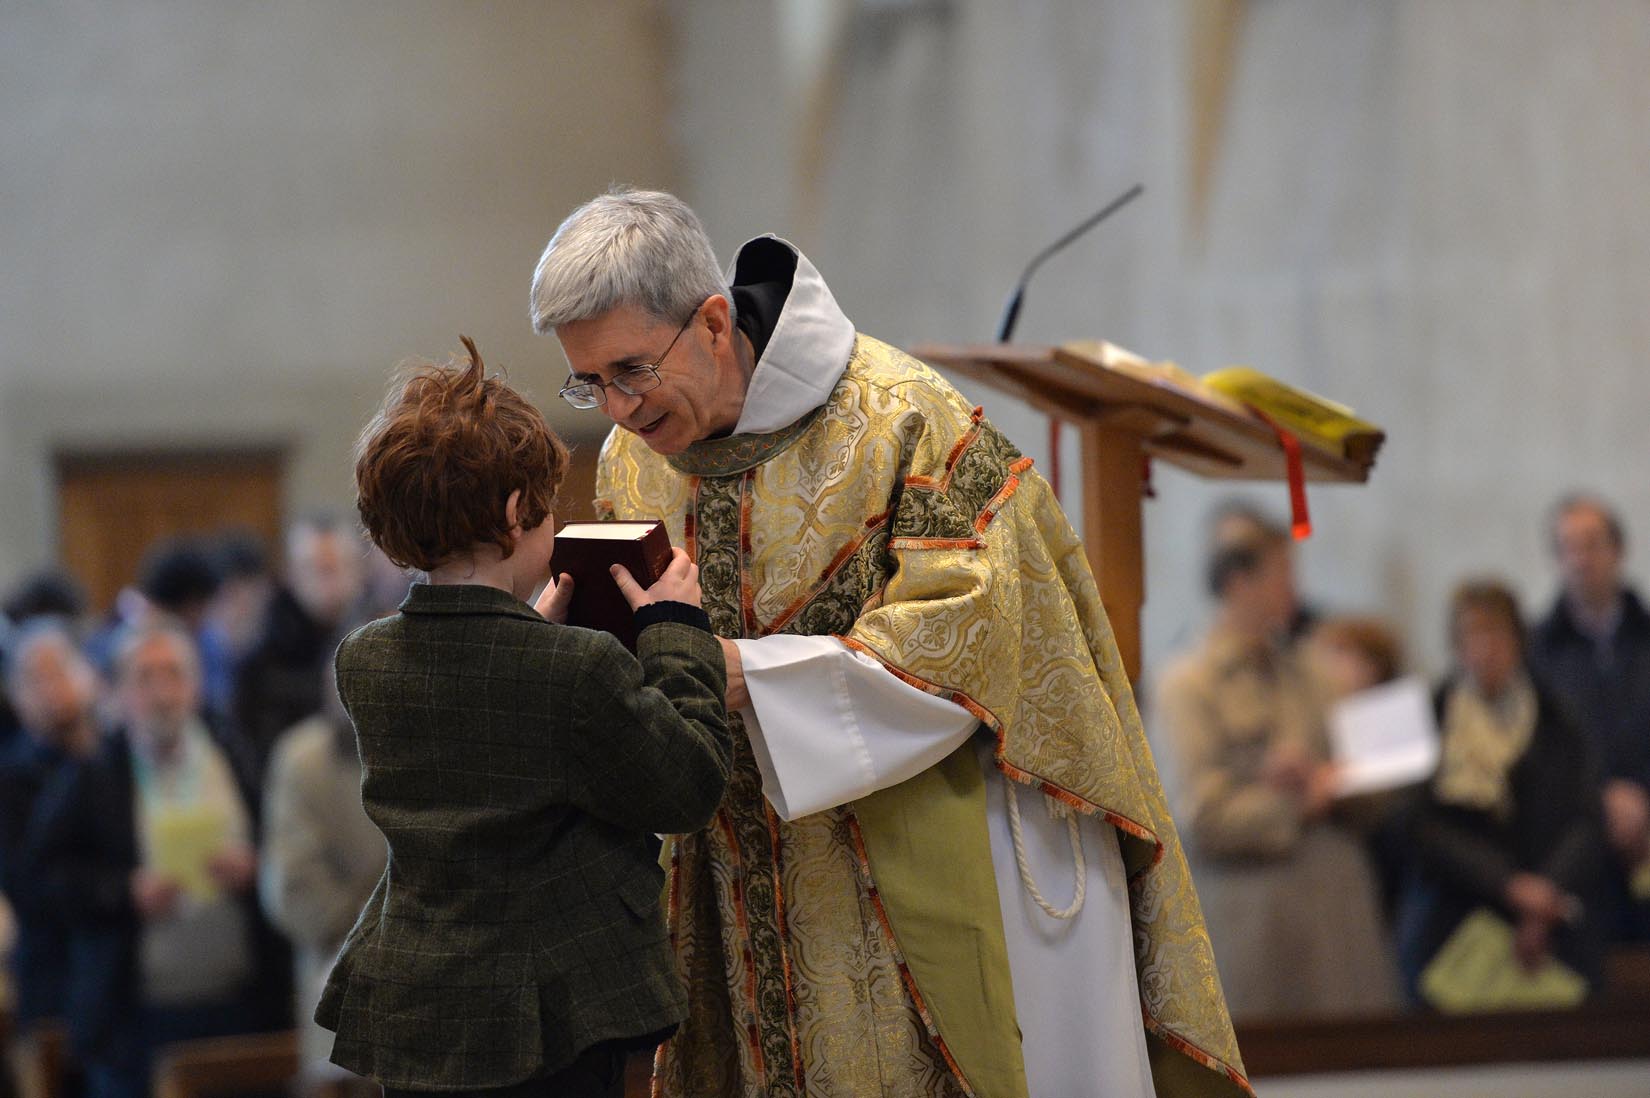 Presentation of the Bible for the children's liturgy